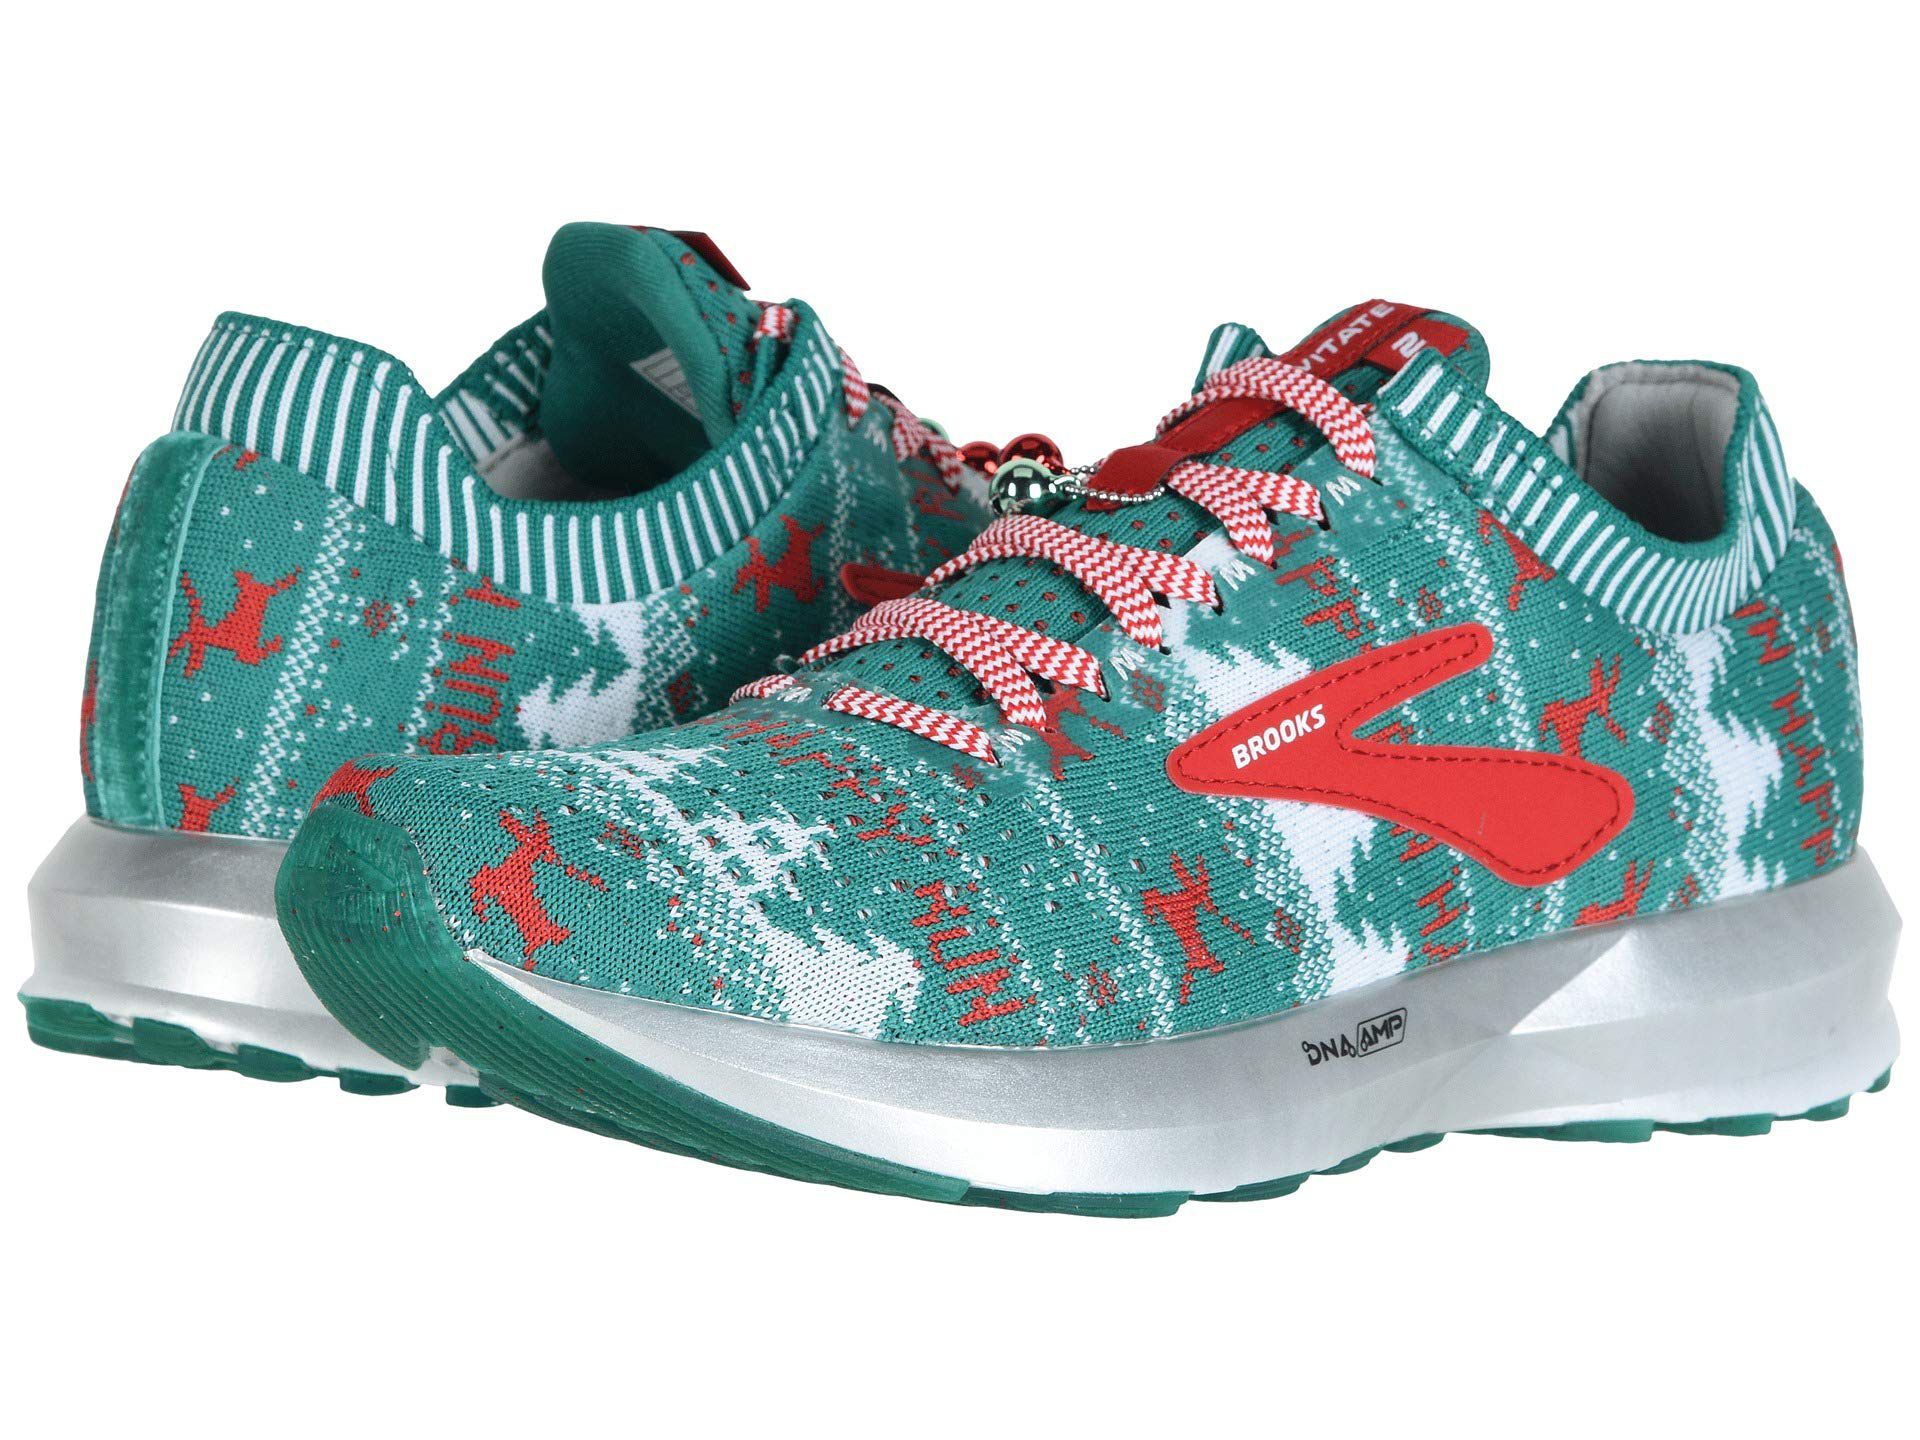 Brooks Christmas Shoes Are Like an Ugly Sweater for Your Feet